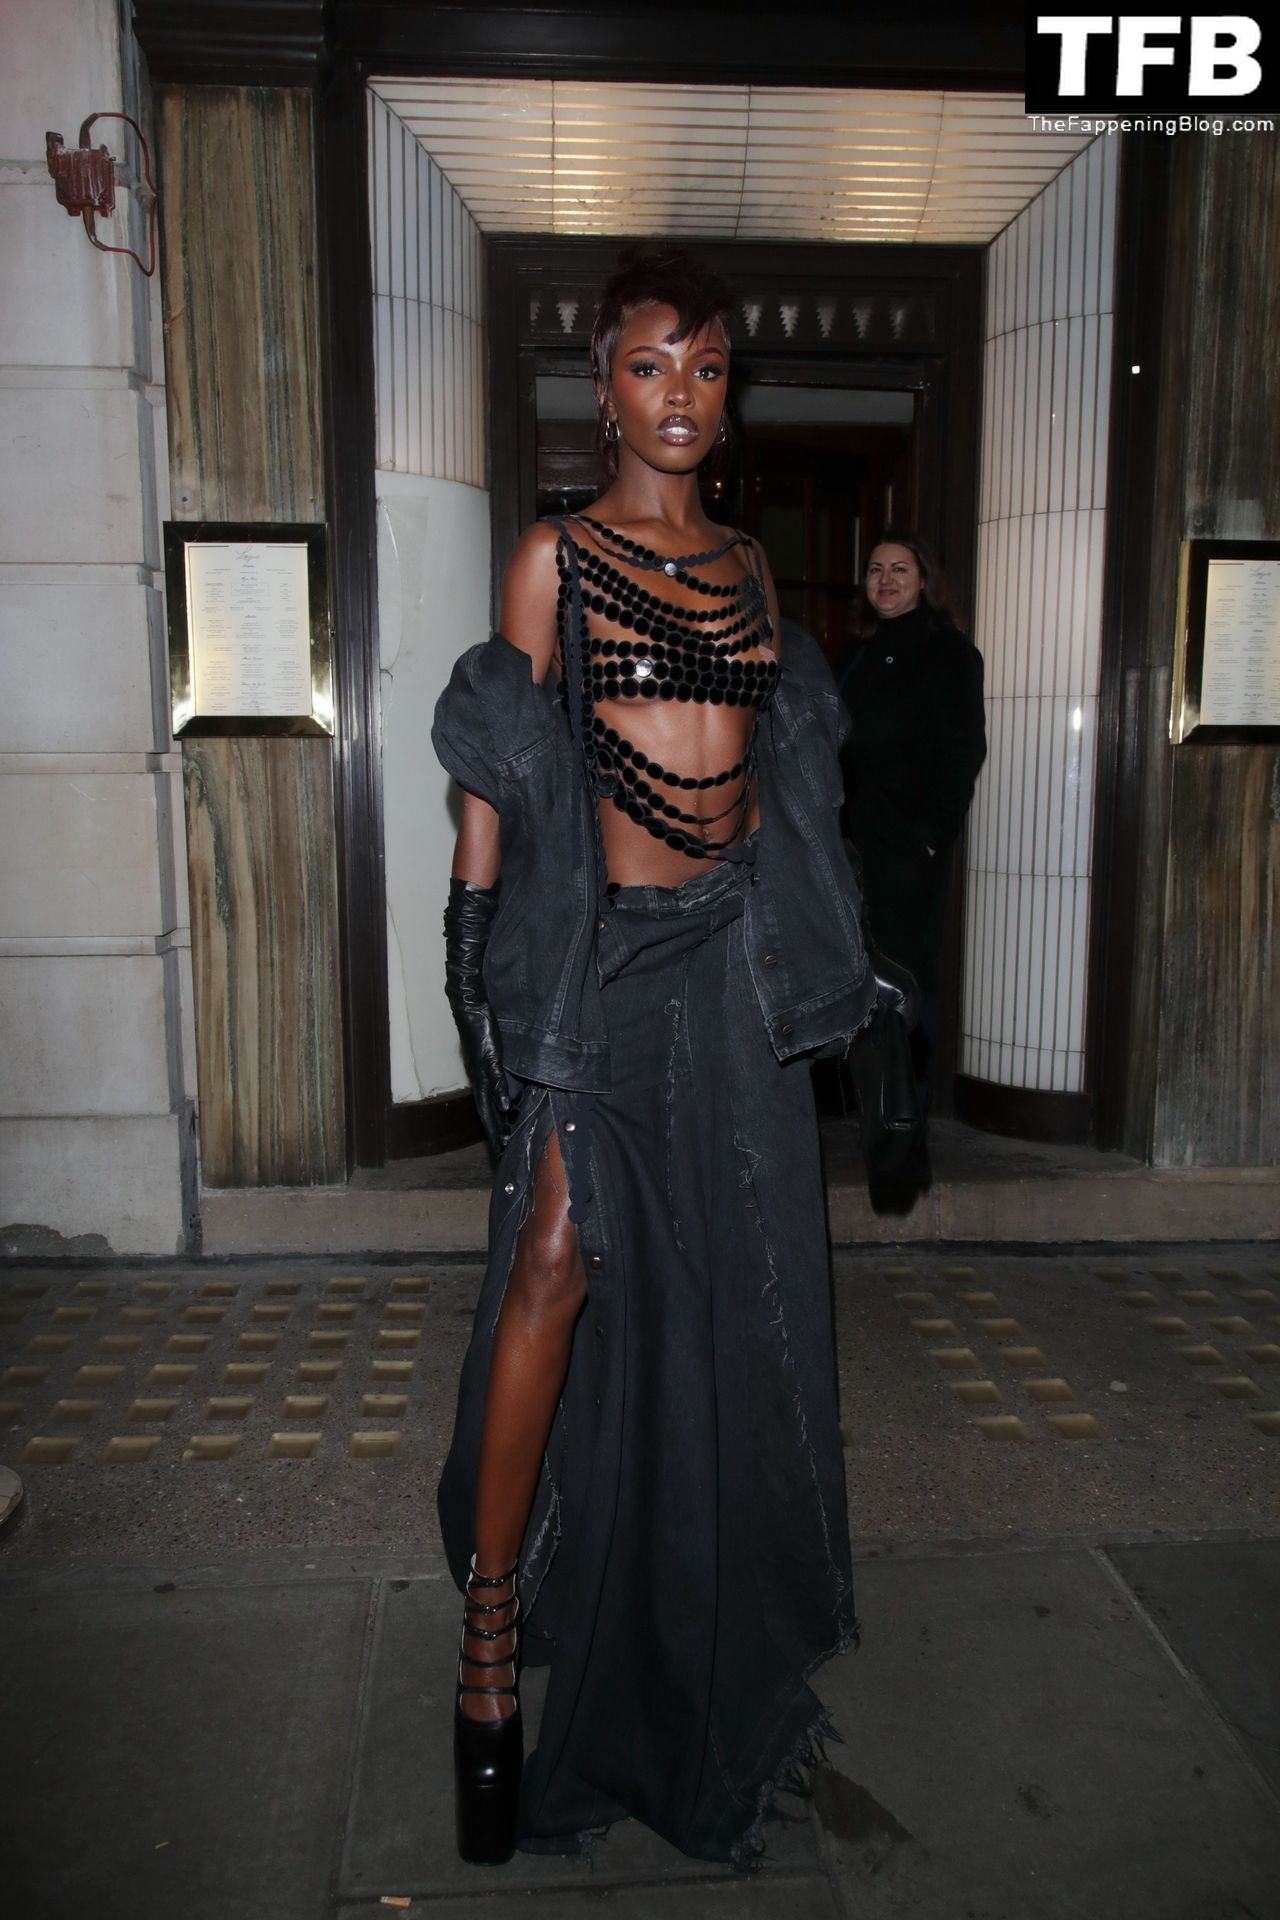 Leomie-Anderson-Sexy-The-Fappening-Blog-23.jpg